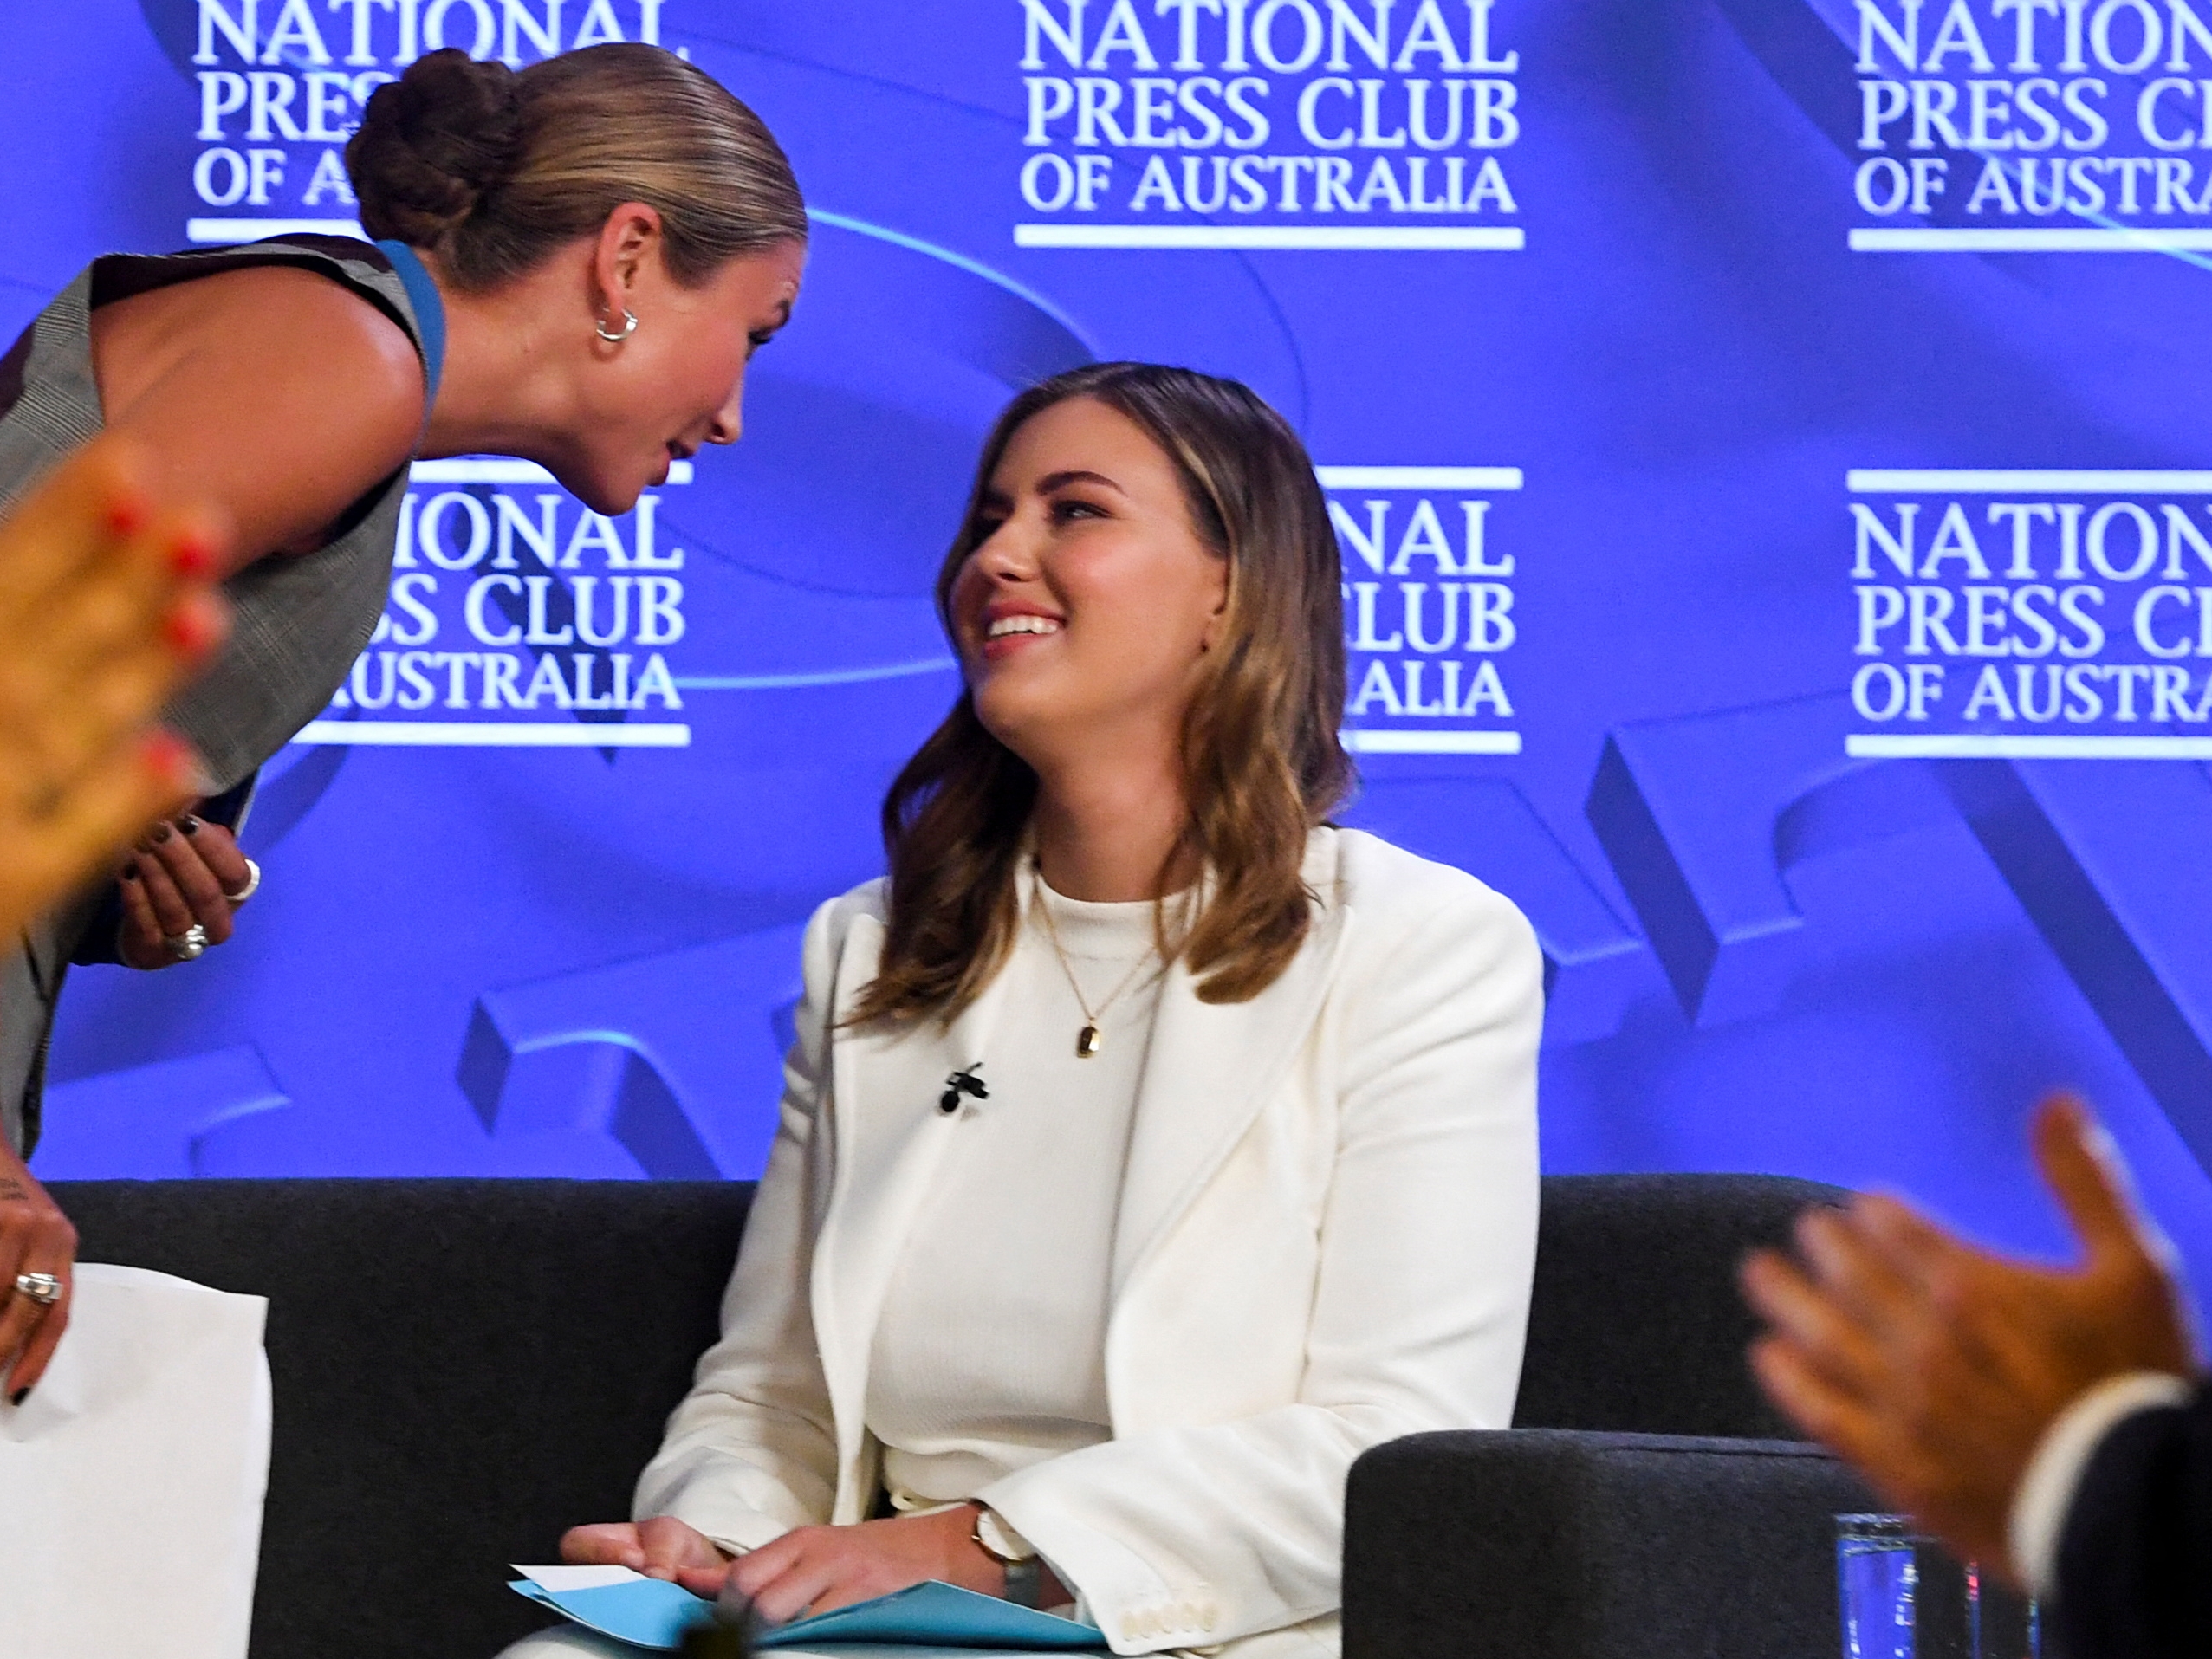 Grace Tame and Brittany Higgins attend the National Press Club in Canberra